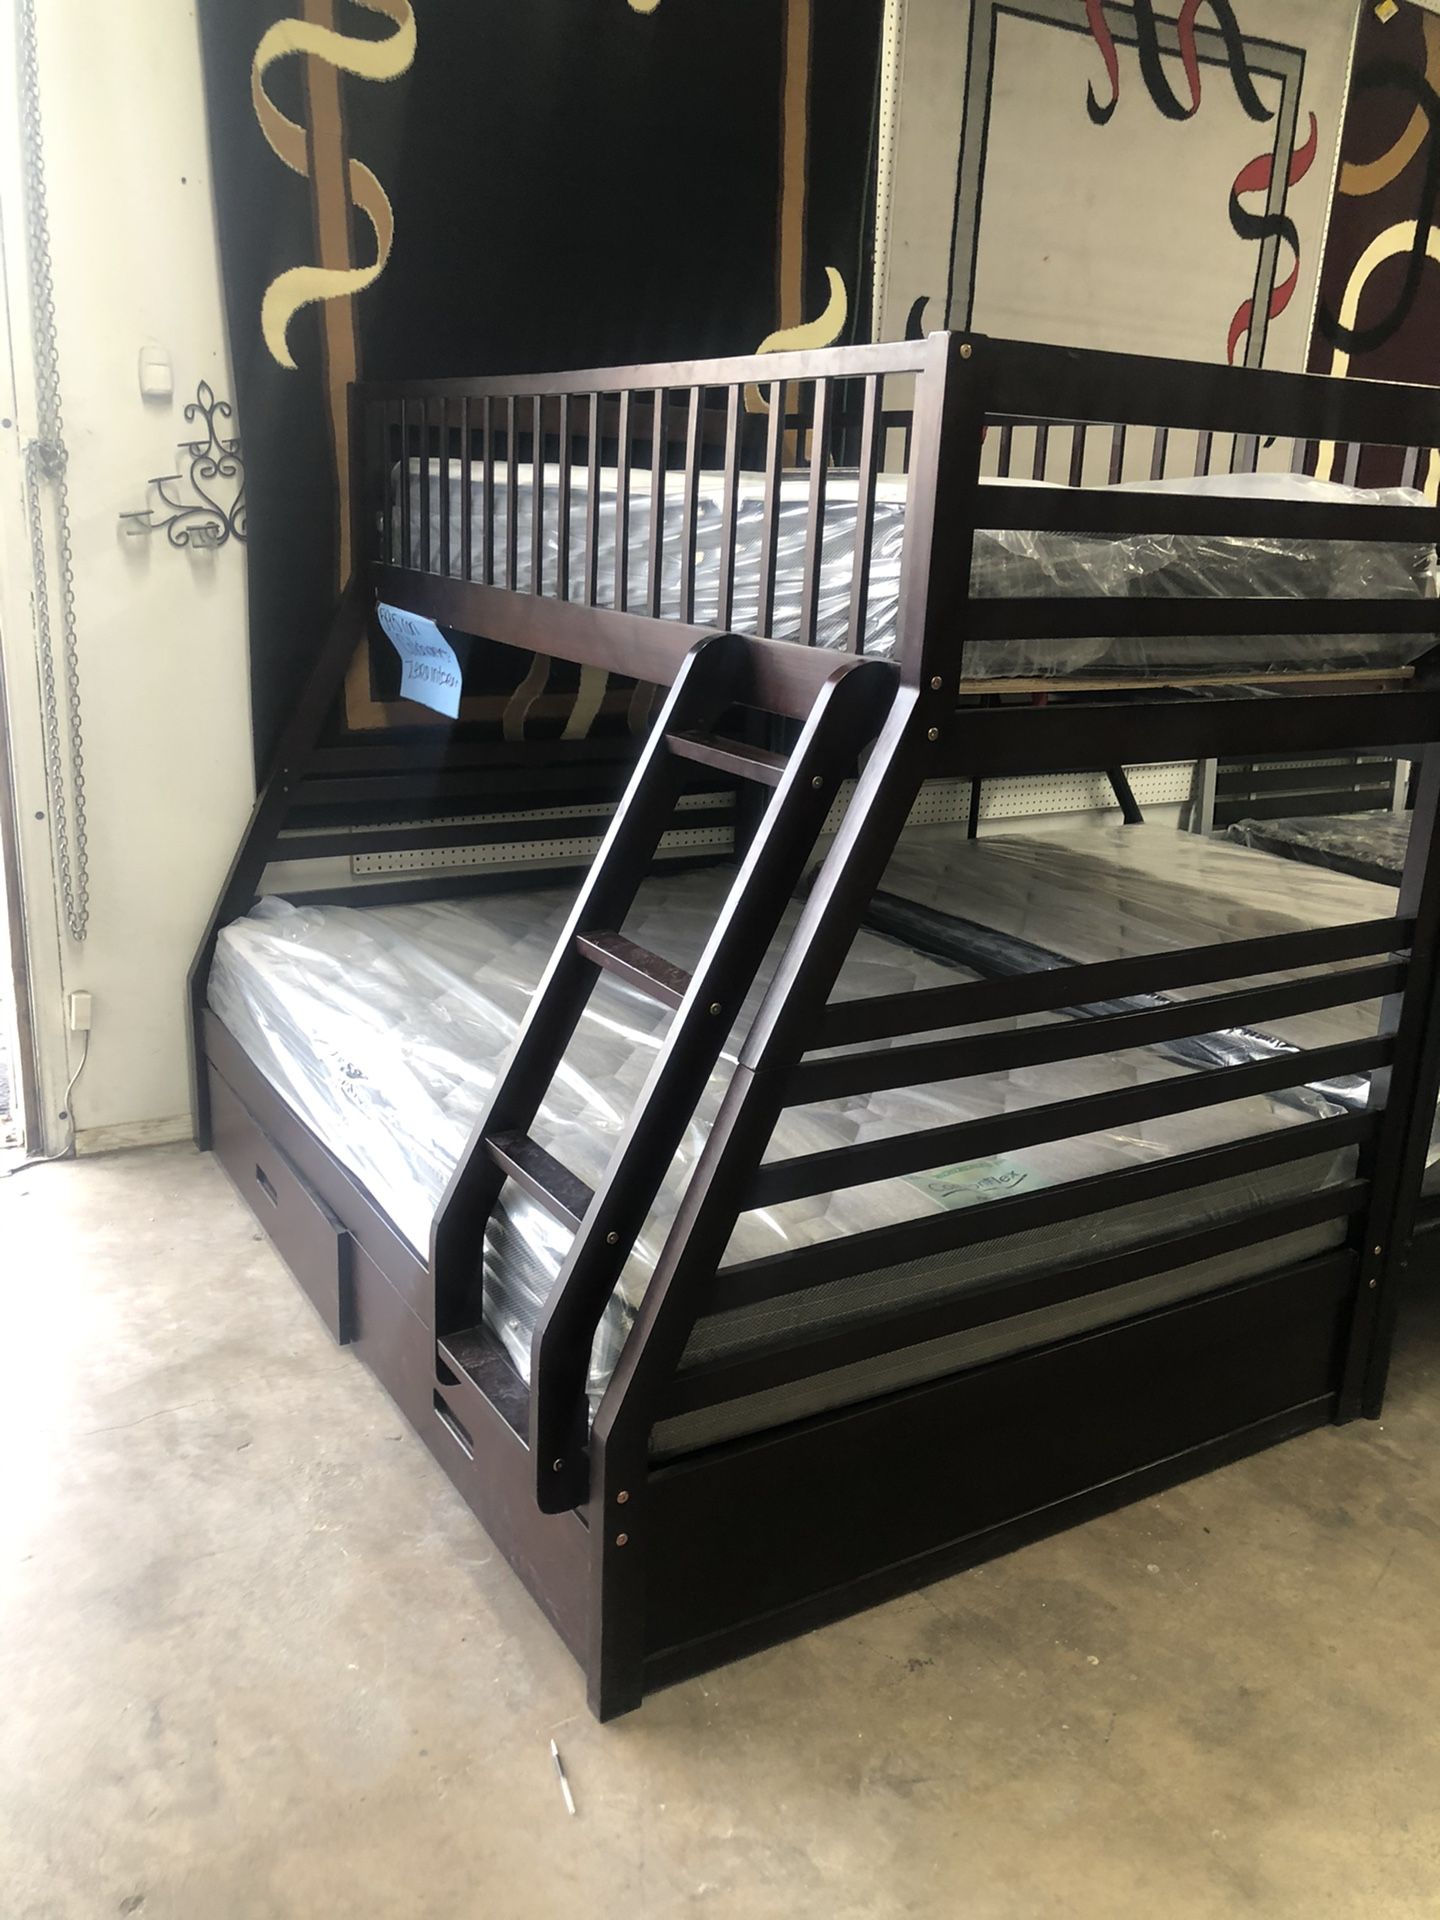 Brand new high end bunk beds with matress and draws only $576